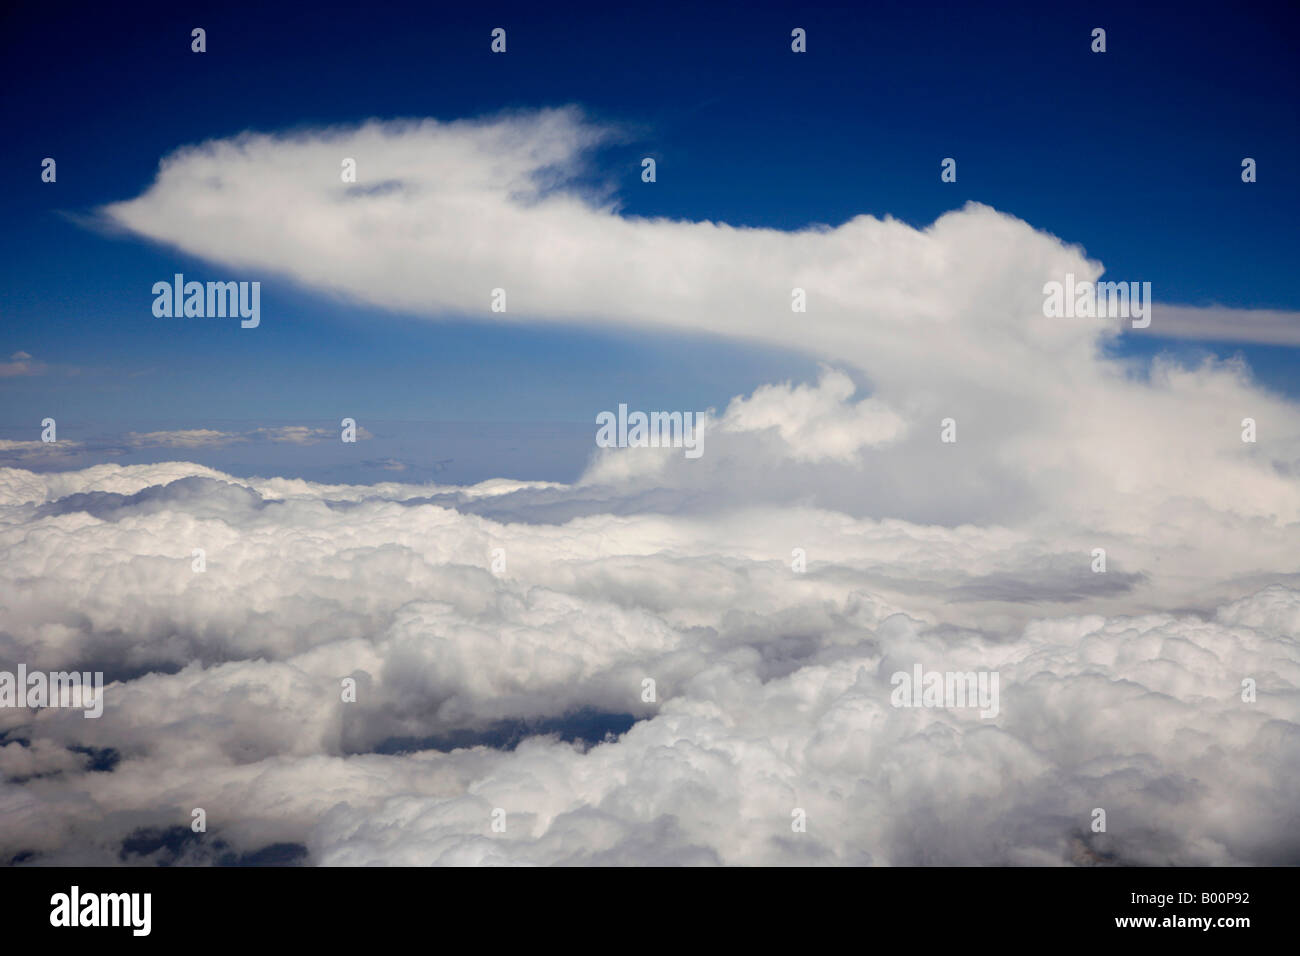 Cumulonimbus Incus clouds seen from an aeroplane over the Peruvian Andes mountain range South America Stock Photo